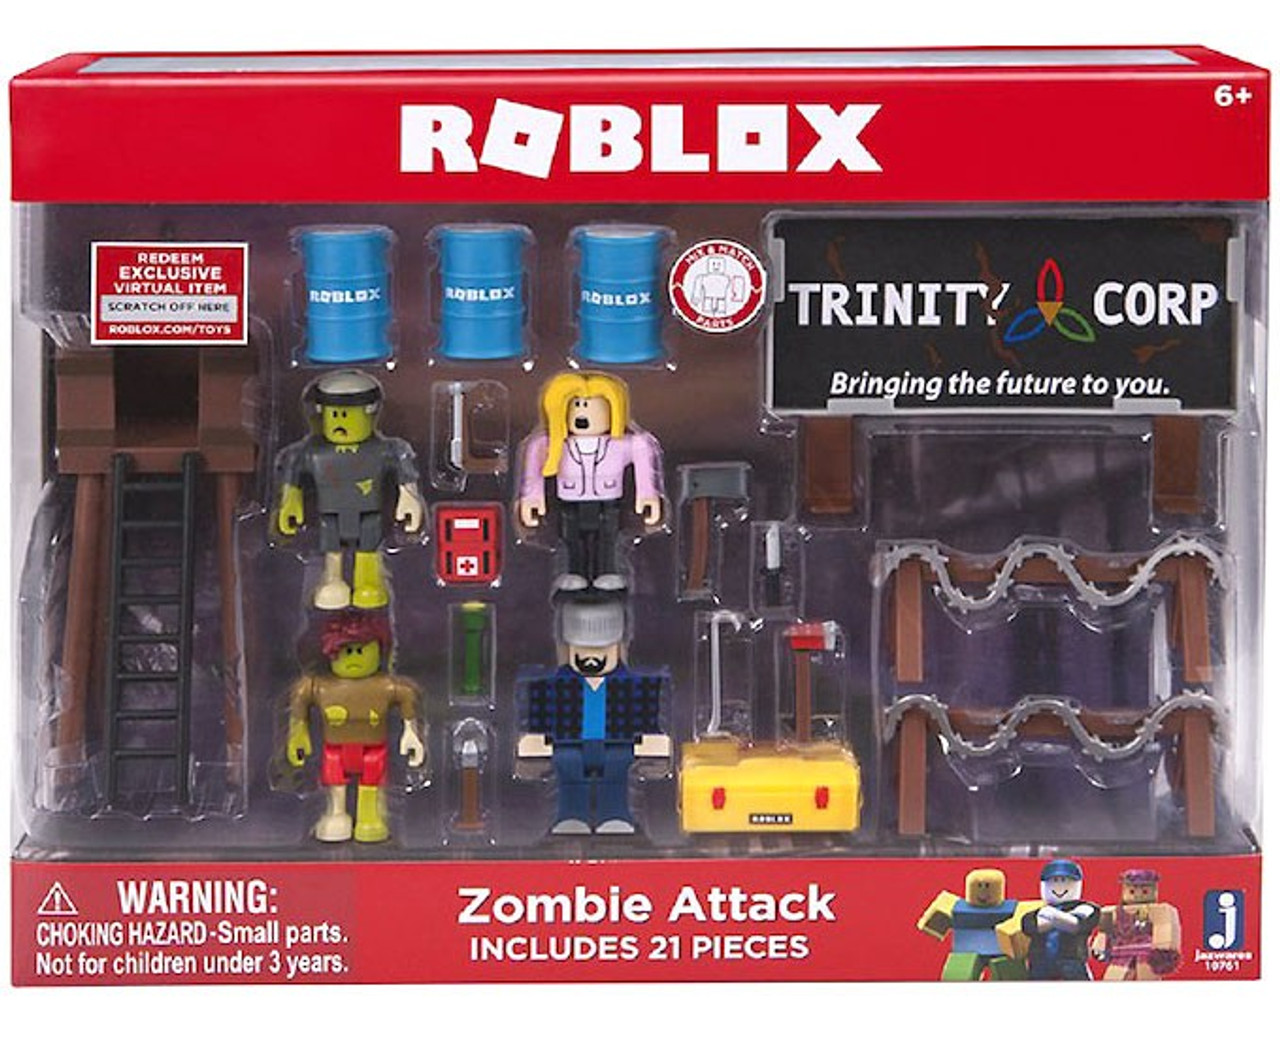 Roblox Zombie Attack 3 Playset Random Box Same Contents Damaged Package Jazwares Toywiz - zombie attack gameplay roblox final boss